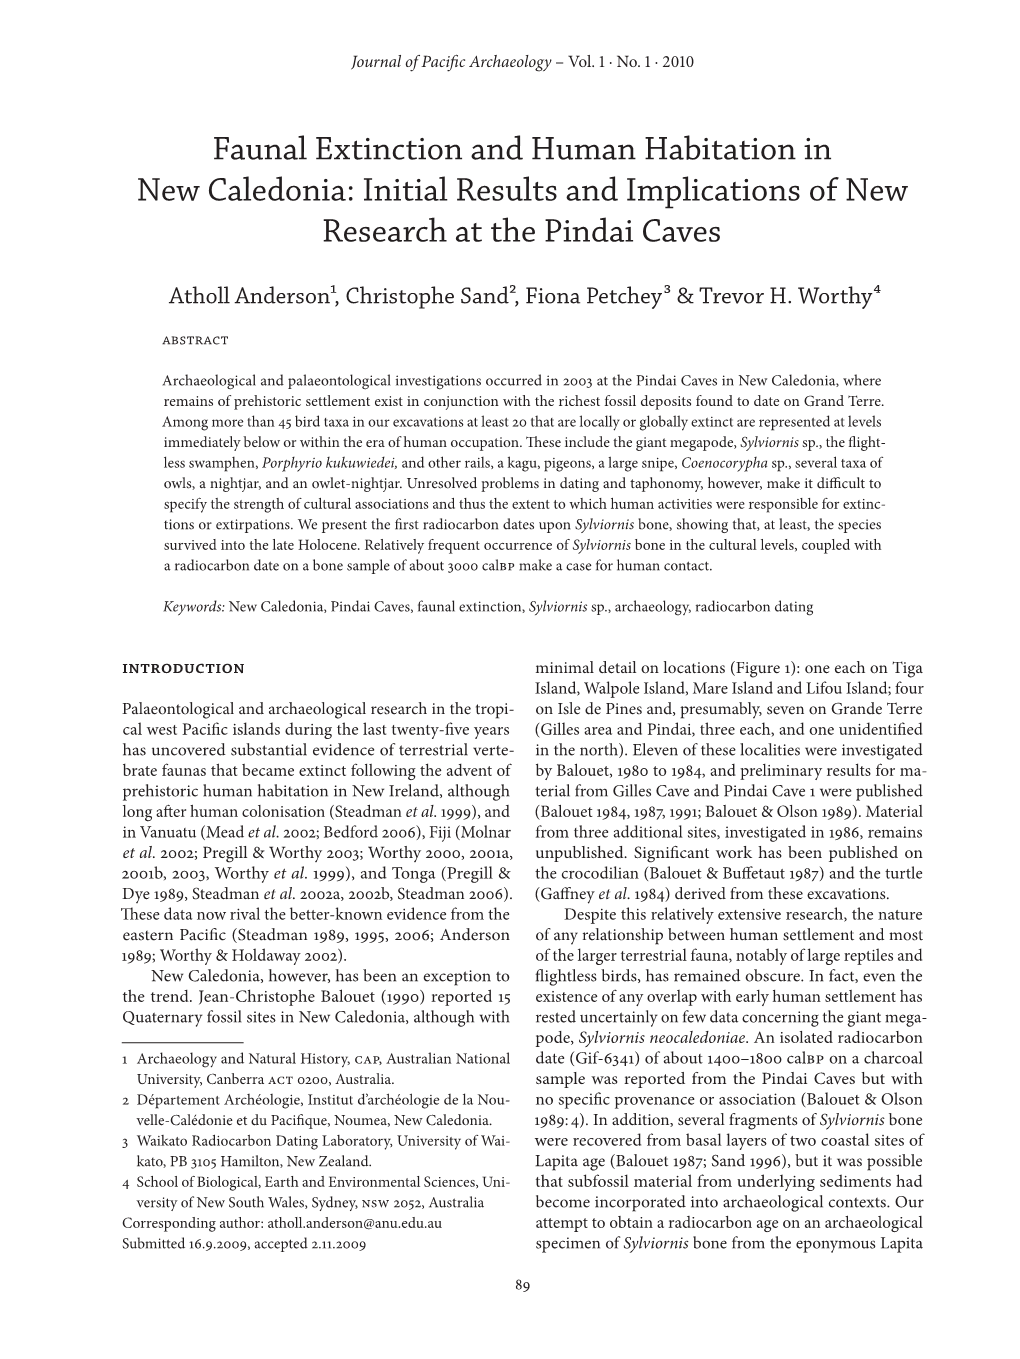 Faunal Extinction and Human Habitation in New Caledonia: Initial Results and Implications of New Research at the Pindai Caves